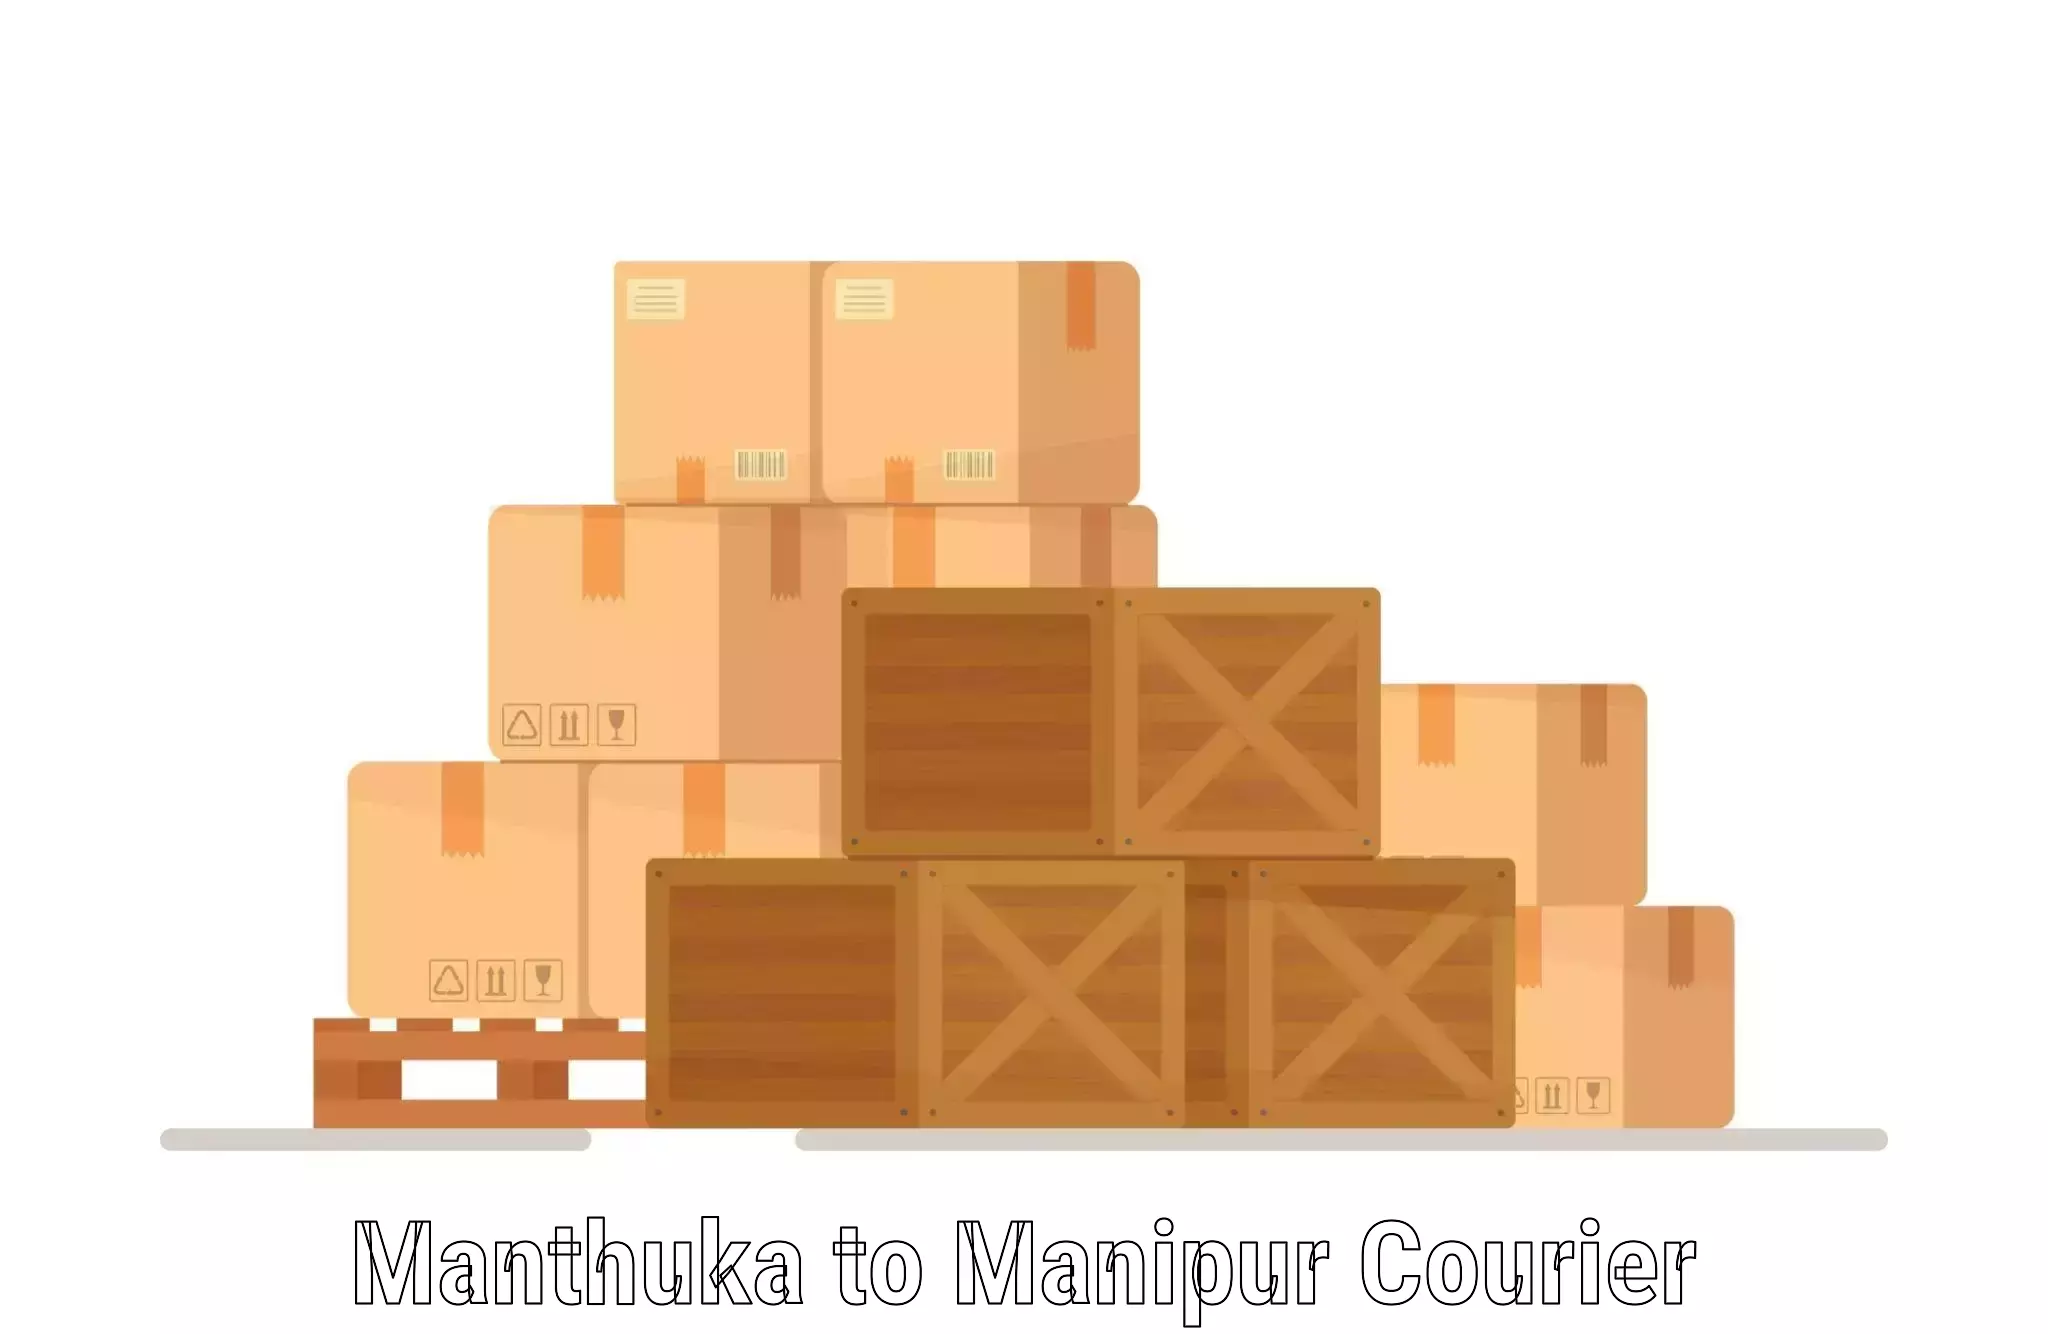 Easy return solutions Manthuka to Manipur